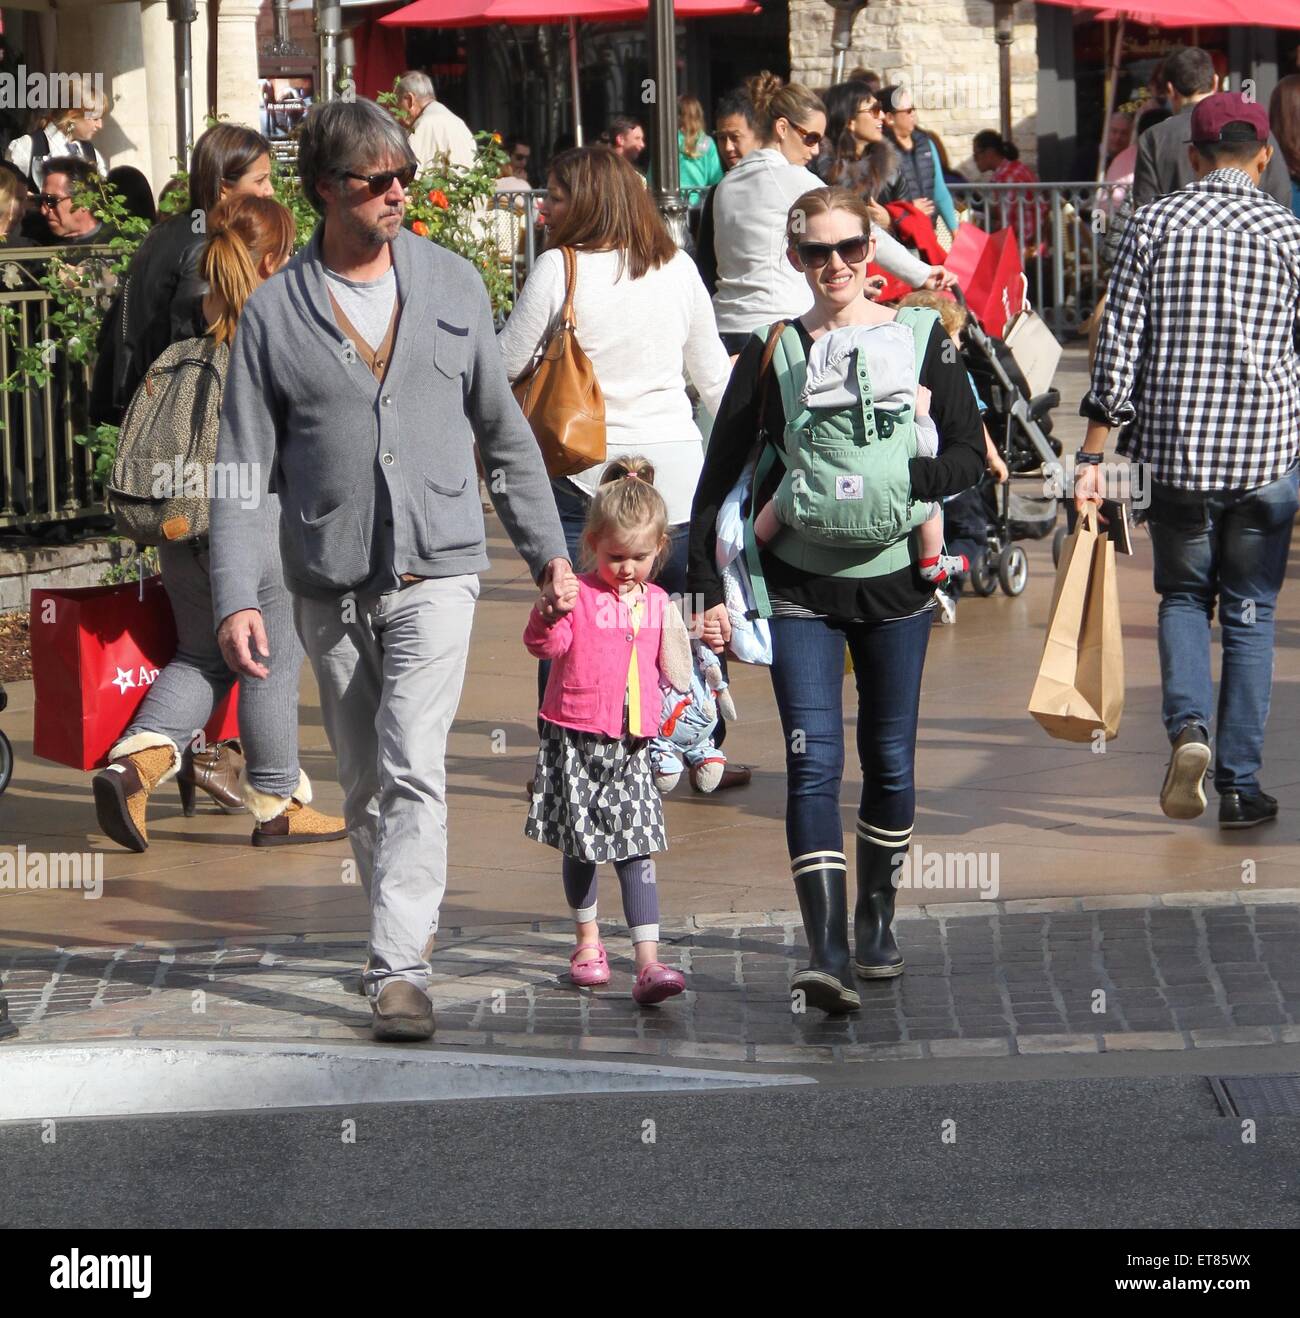 The Killing star, Mireille Enos with husband Alan Ruck take their family Christmas shopping at The Grove in Hollywood  Featuring: Mireille Enos, Alan Ruck, Vesper Vivianne Ruck, Sam Ruck Where: Los Angeles, California, United States When: 21 Dec 2014 Credit: WENN.com Stock Photo